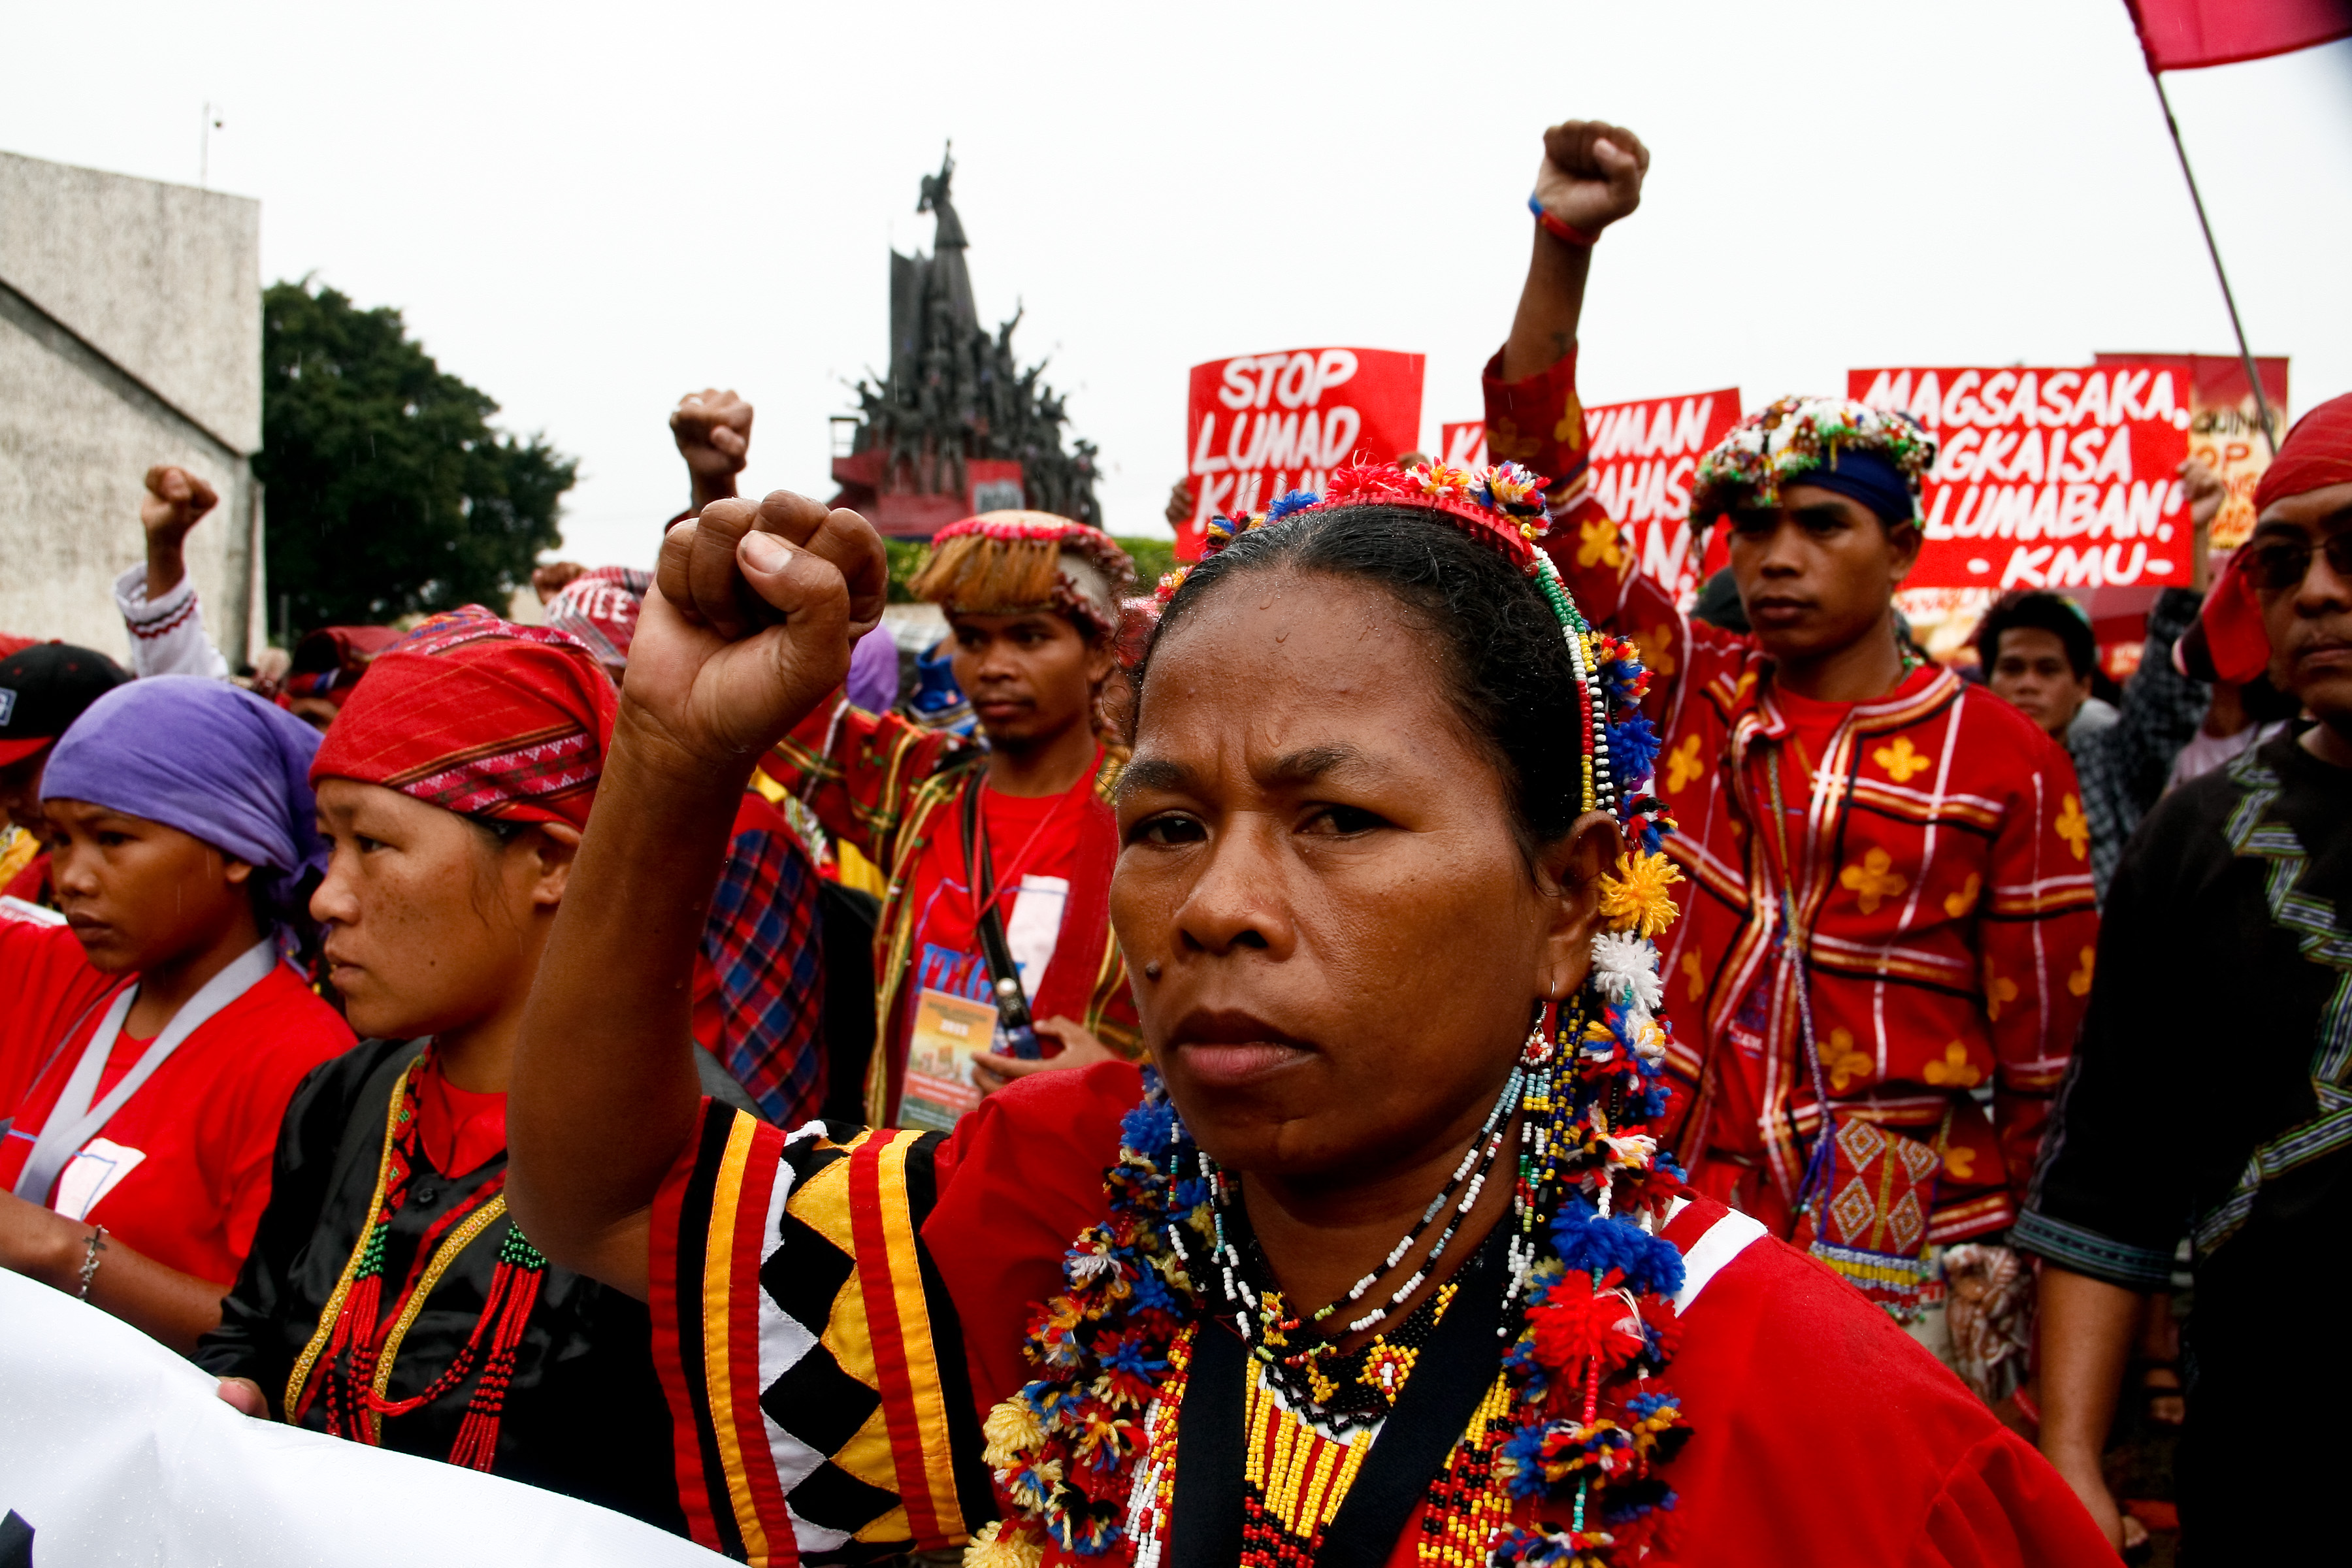 Lumads start their march to Camp Aguinaldo in Quezon City.  Hundreds of "Lumad" marched to the headquarters of the Armed Forces of the Philippines in Camp Aguinaldo, to call for justice for the killings of their tribes men, allegedly perpetrated by members of the Philippine military. (J Gerard Seguia—Pacific Press—LightRocket/Getty Images)